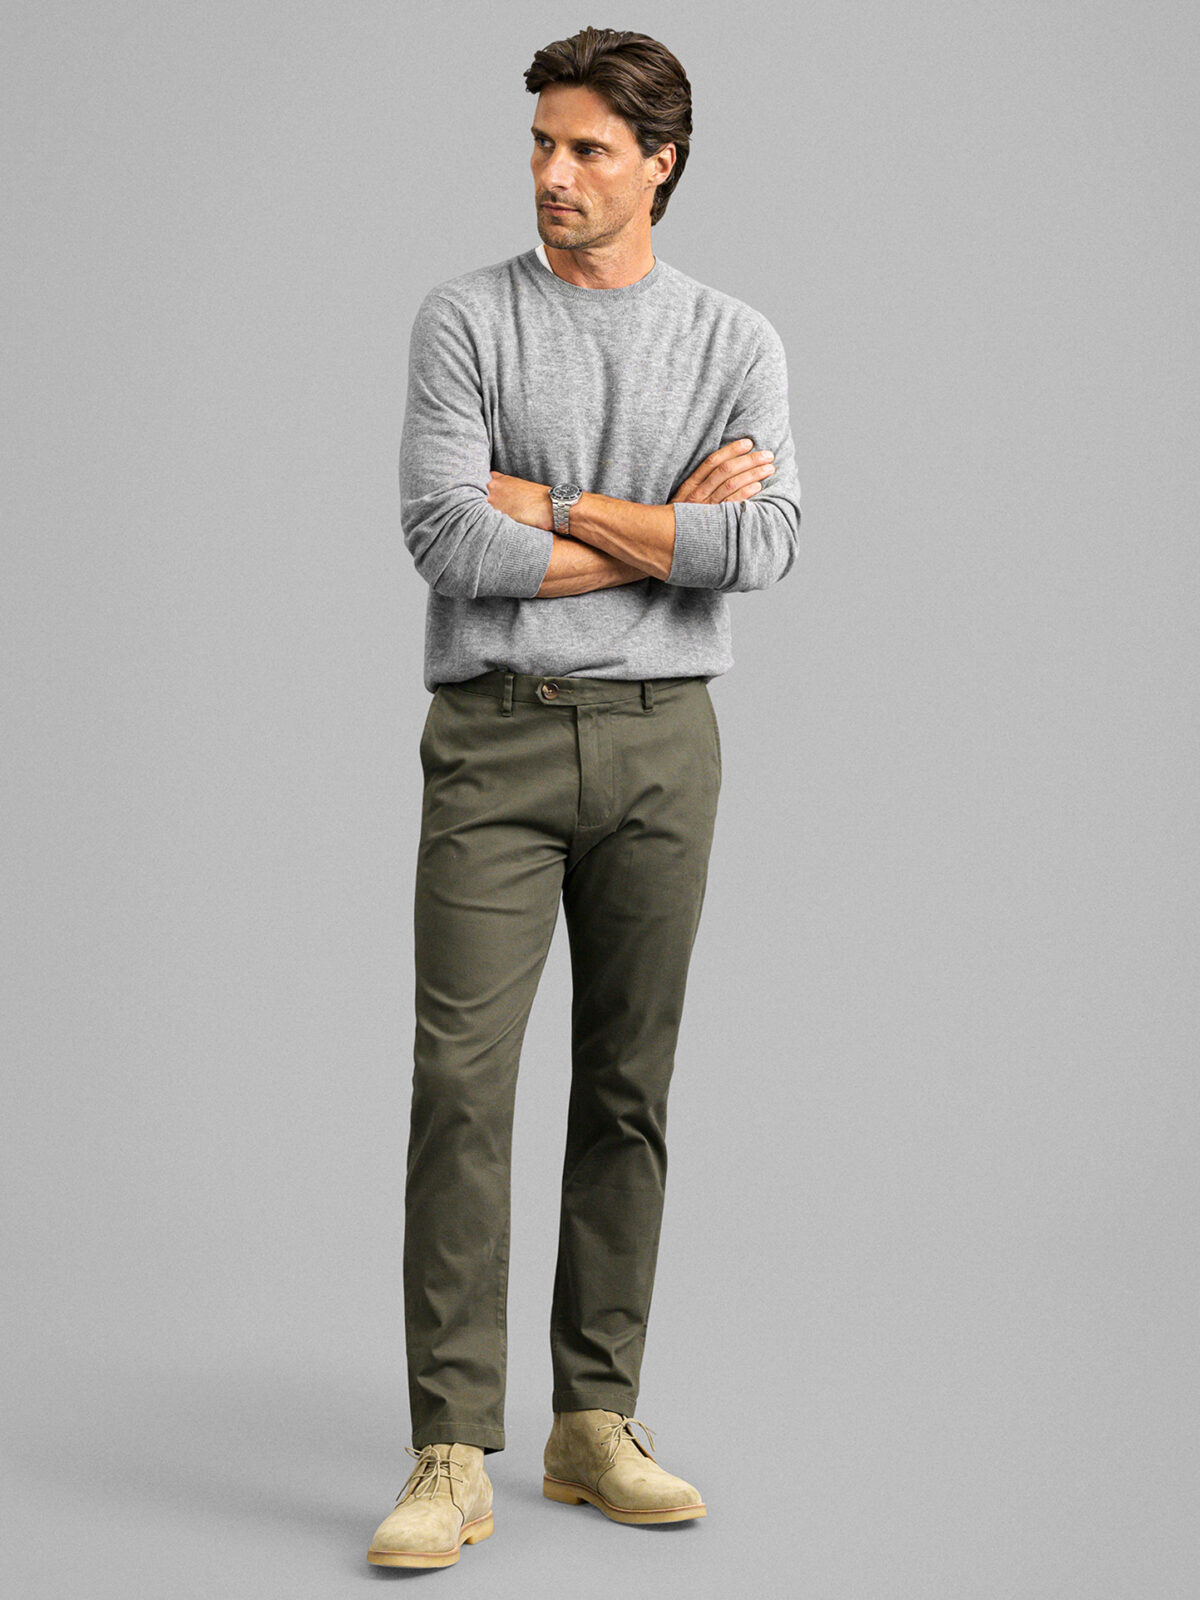 Khaki Chinos with Faded Green Shirt